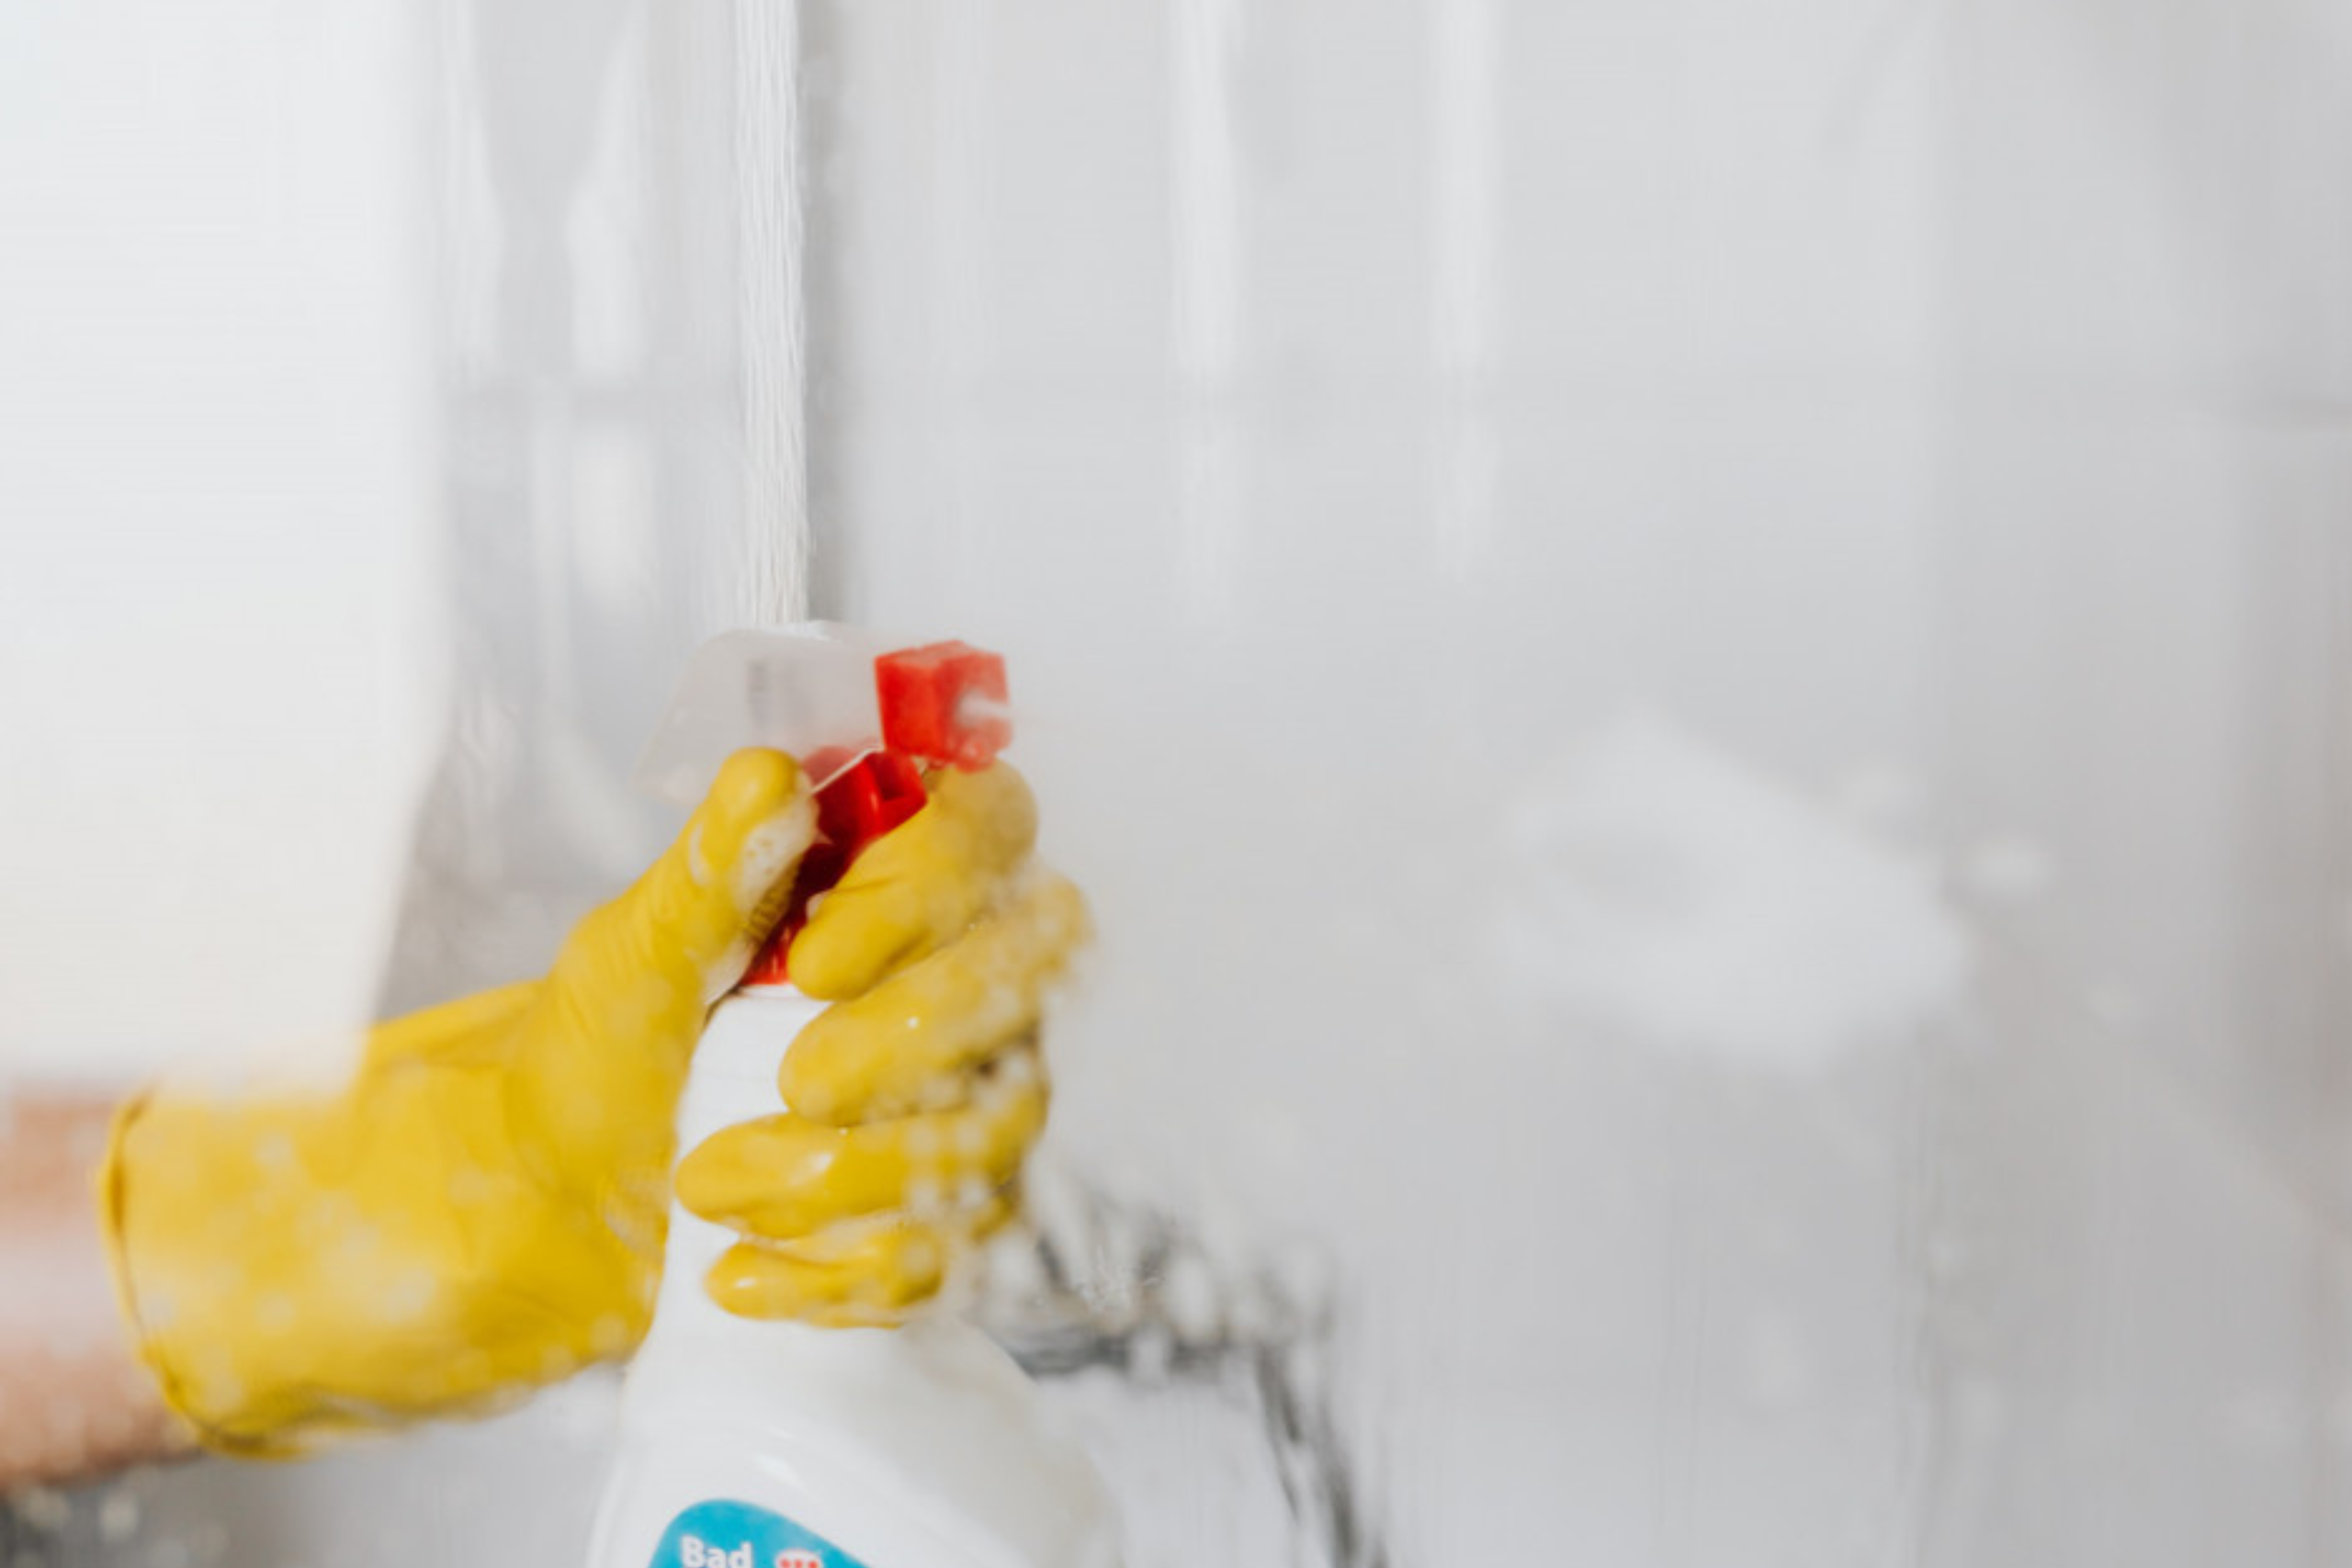 cleaning products you should never mix, can mixing bleach and vinegar kill you